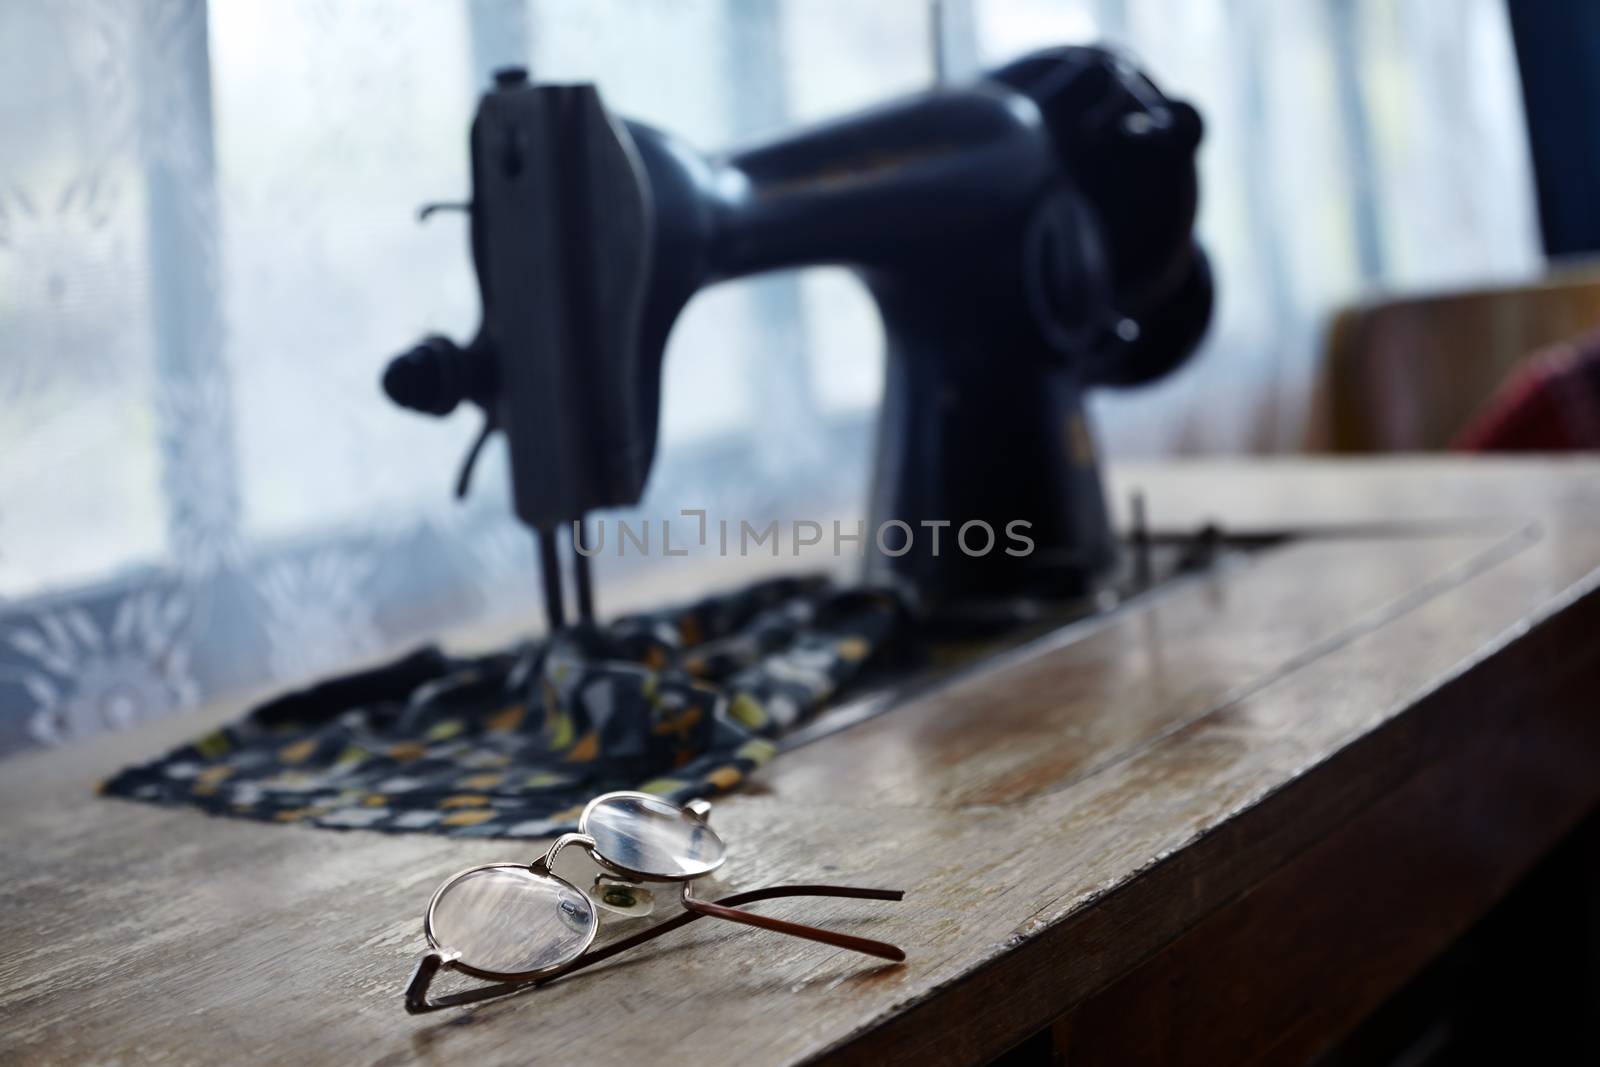 Old eyeglasses and sewing machine near the window